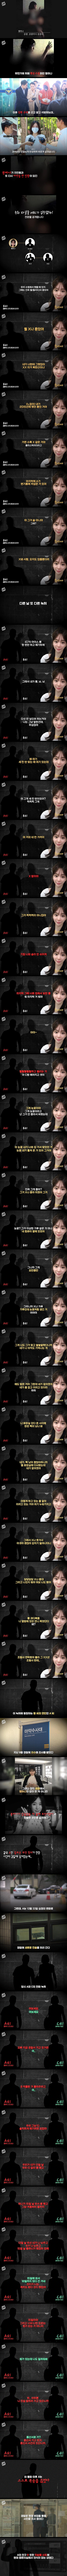 Recordings of Hwang Ha-na's New Cultivation and Suspicious Deaths in the Dairy Industry